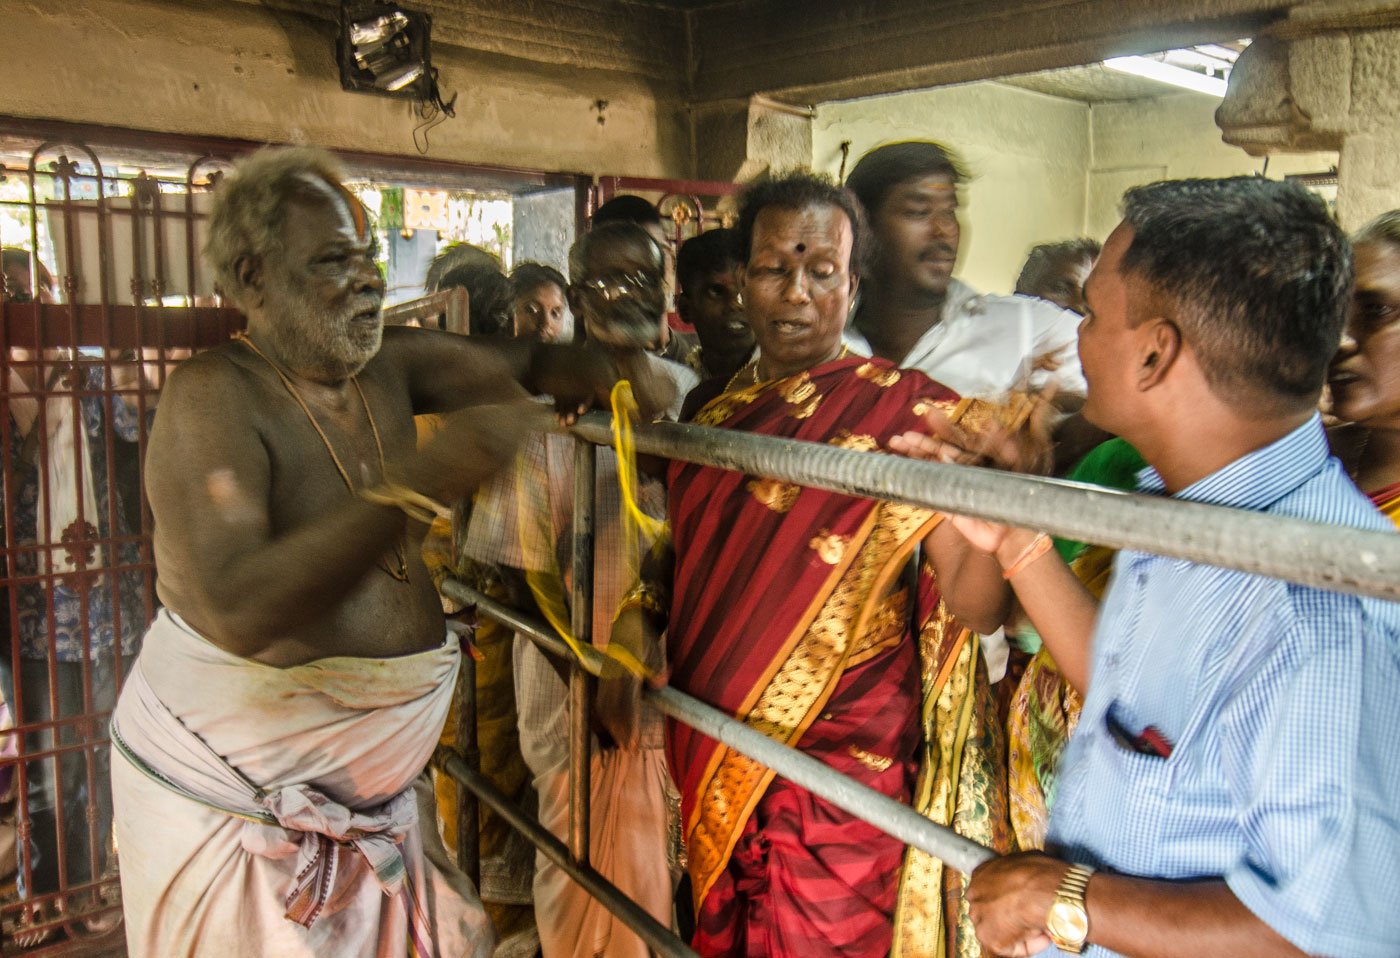 One of the priests at the Koothandavar temple begins the wedding rituals. He ties a yellow thread called thali around the neck of each aravani to consecrate her union with Aravan. 